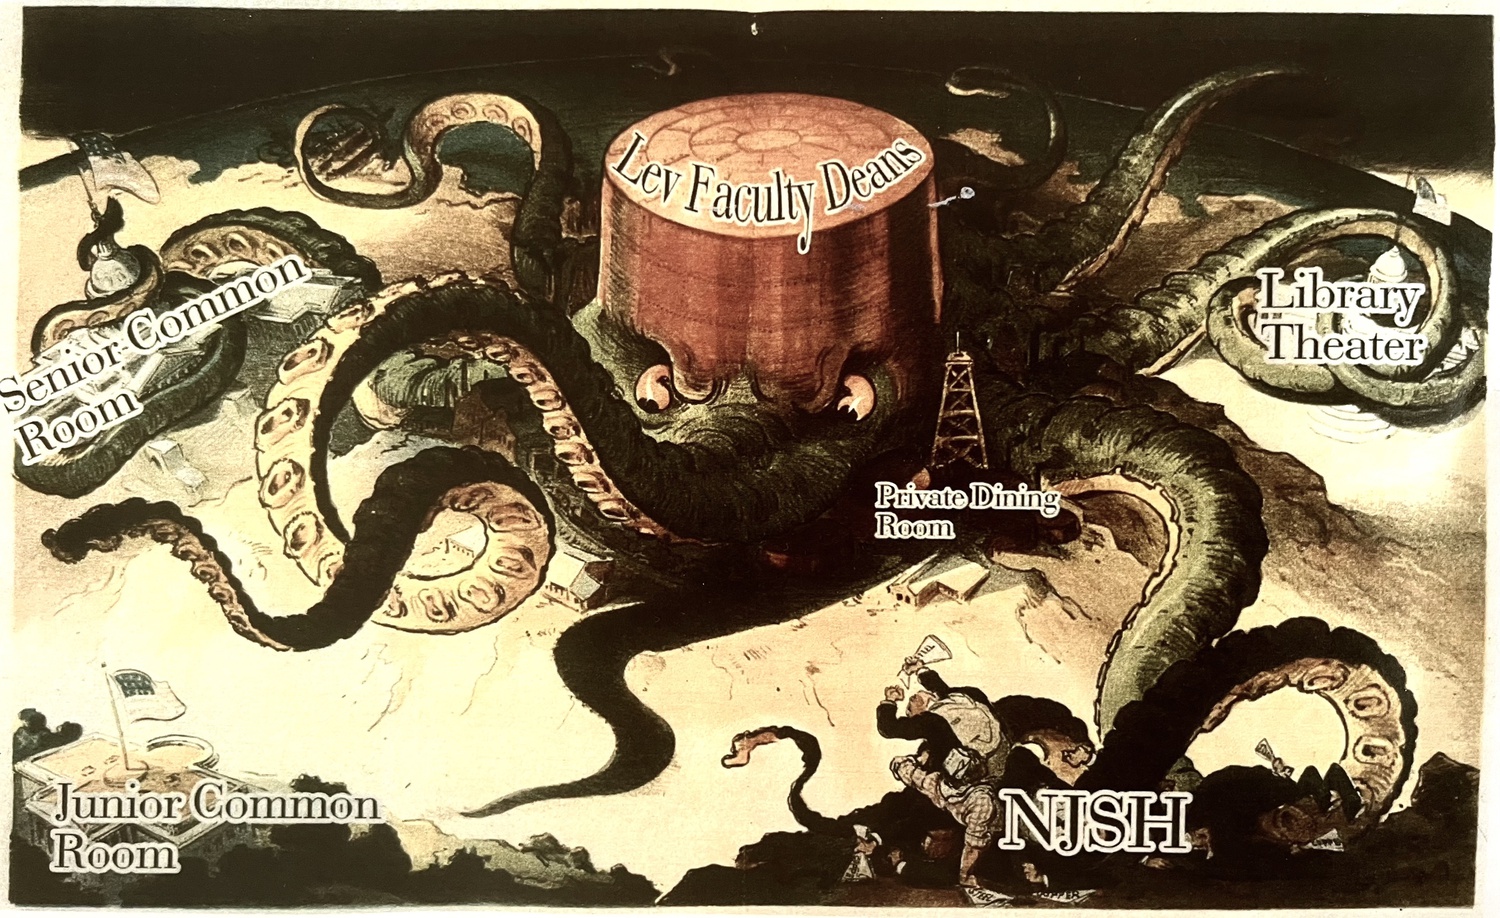 In Spring 2019, students circulated a political cartoon that depicted the former Leverett faculty deans as the Standard Oil octopus due to unpopular changes they made around the house.